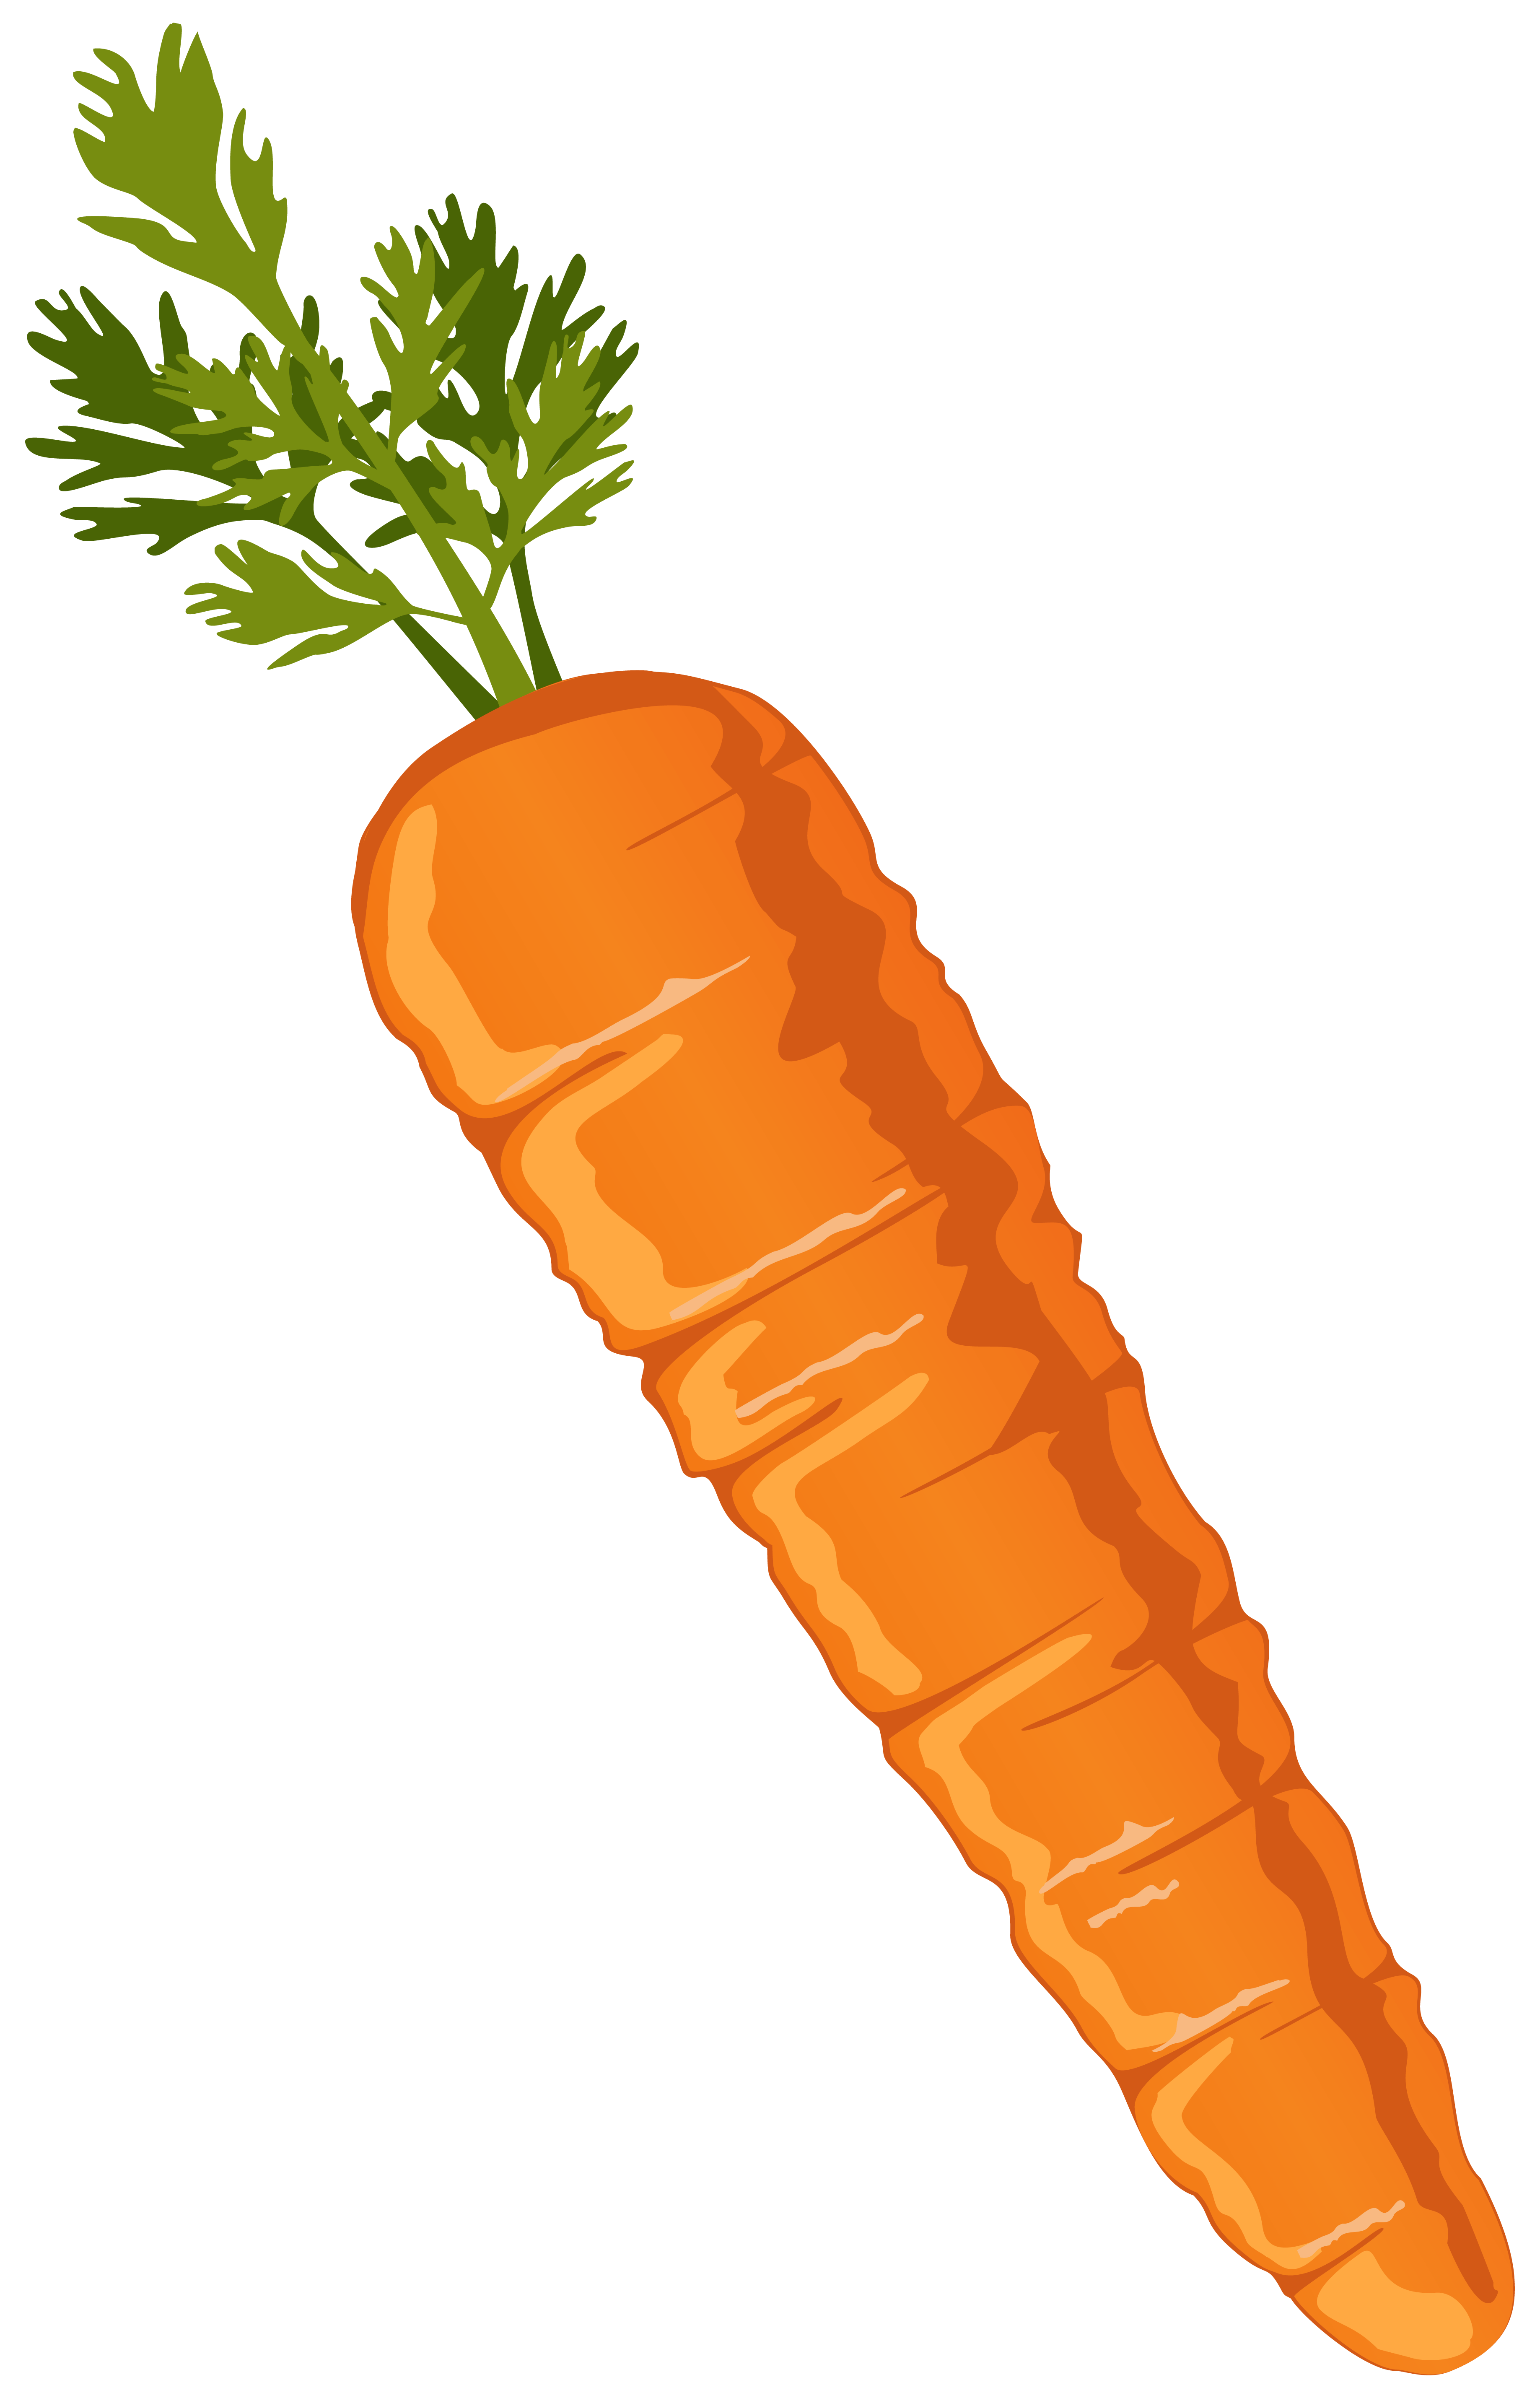 Carrot clipart image gallery yopriceville high quality png